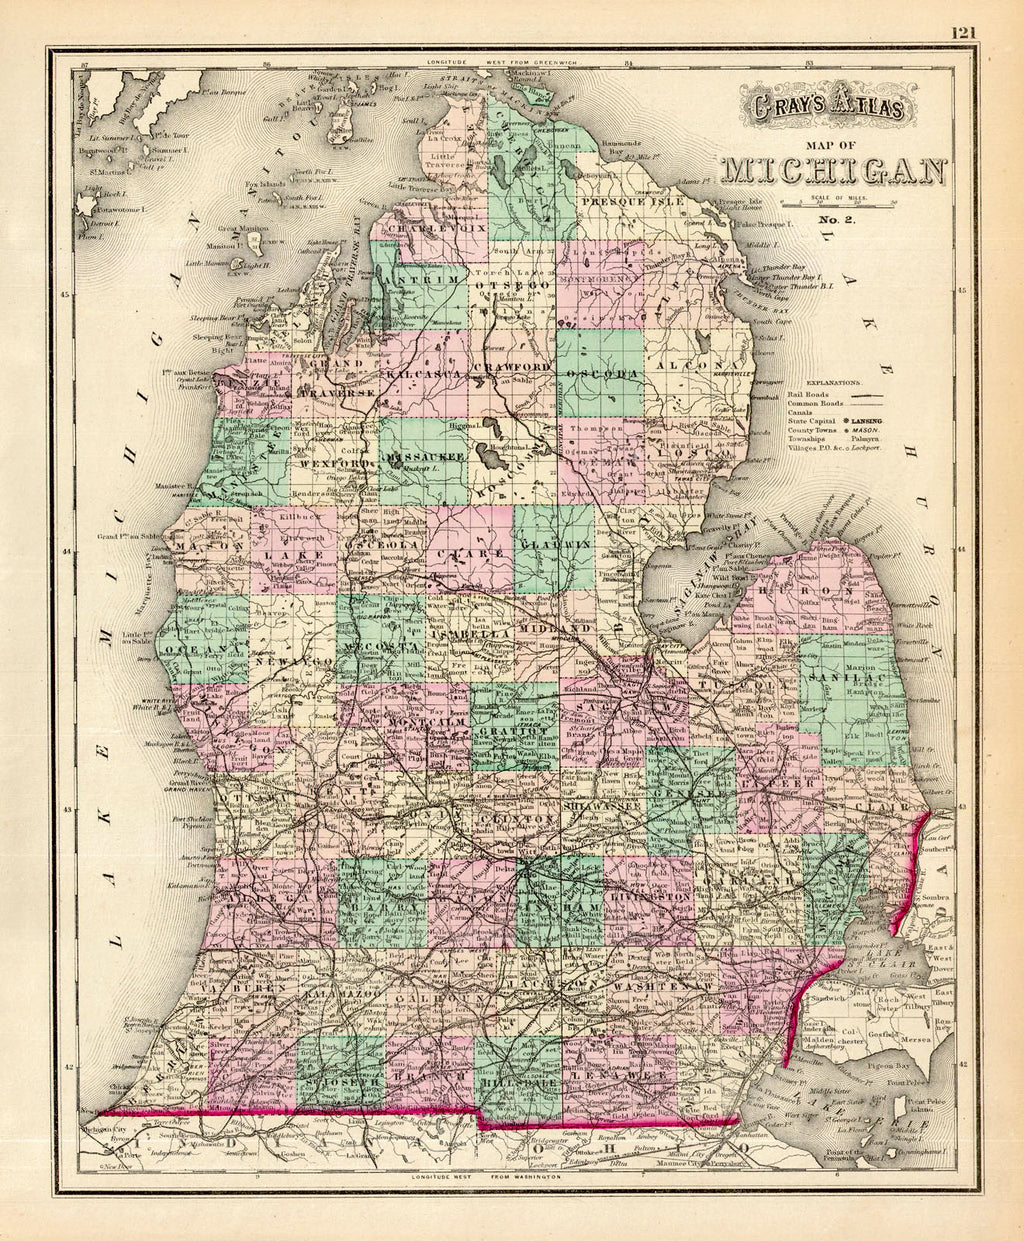 Michigan Gray, 1874 With settlement dense along the lower third of the state we see northern counties empty as railroads press northward toward resources and the upper peninsula. Dense with railroads and roads we get a sense of the activity of the time through its infrastructure. Condition is very good. Image size is approximately 15 x 12 (inches)